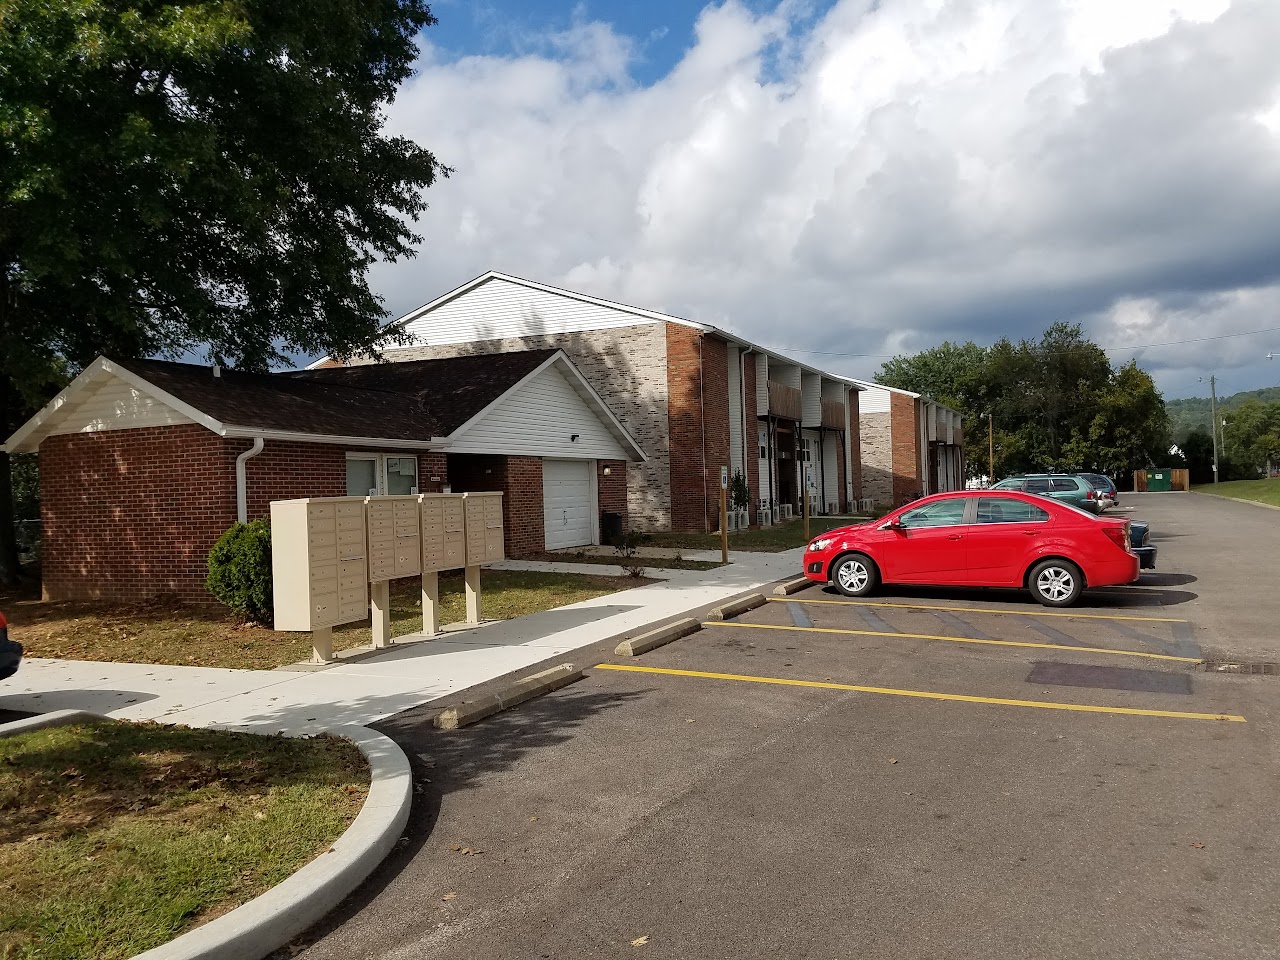 Photo of MAPLEWOOD II APARTMENTS. Affordable housing located at 1 - 87 SARGENT SQUARE POCA, WV 25311